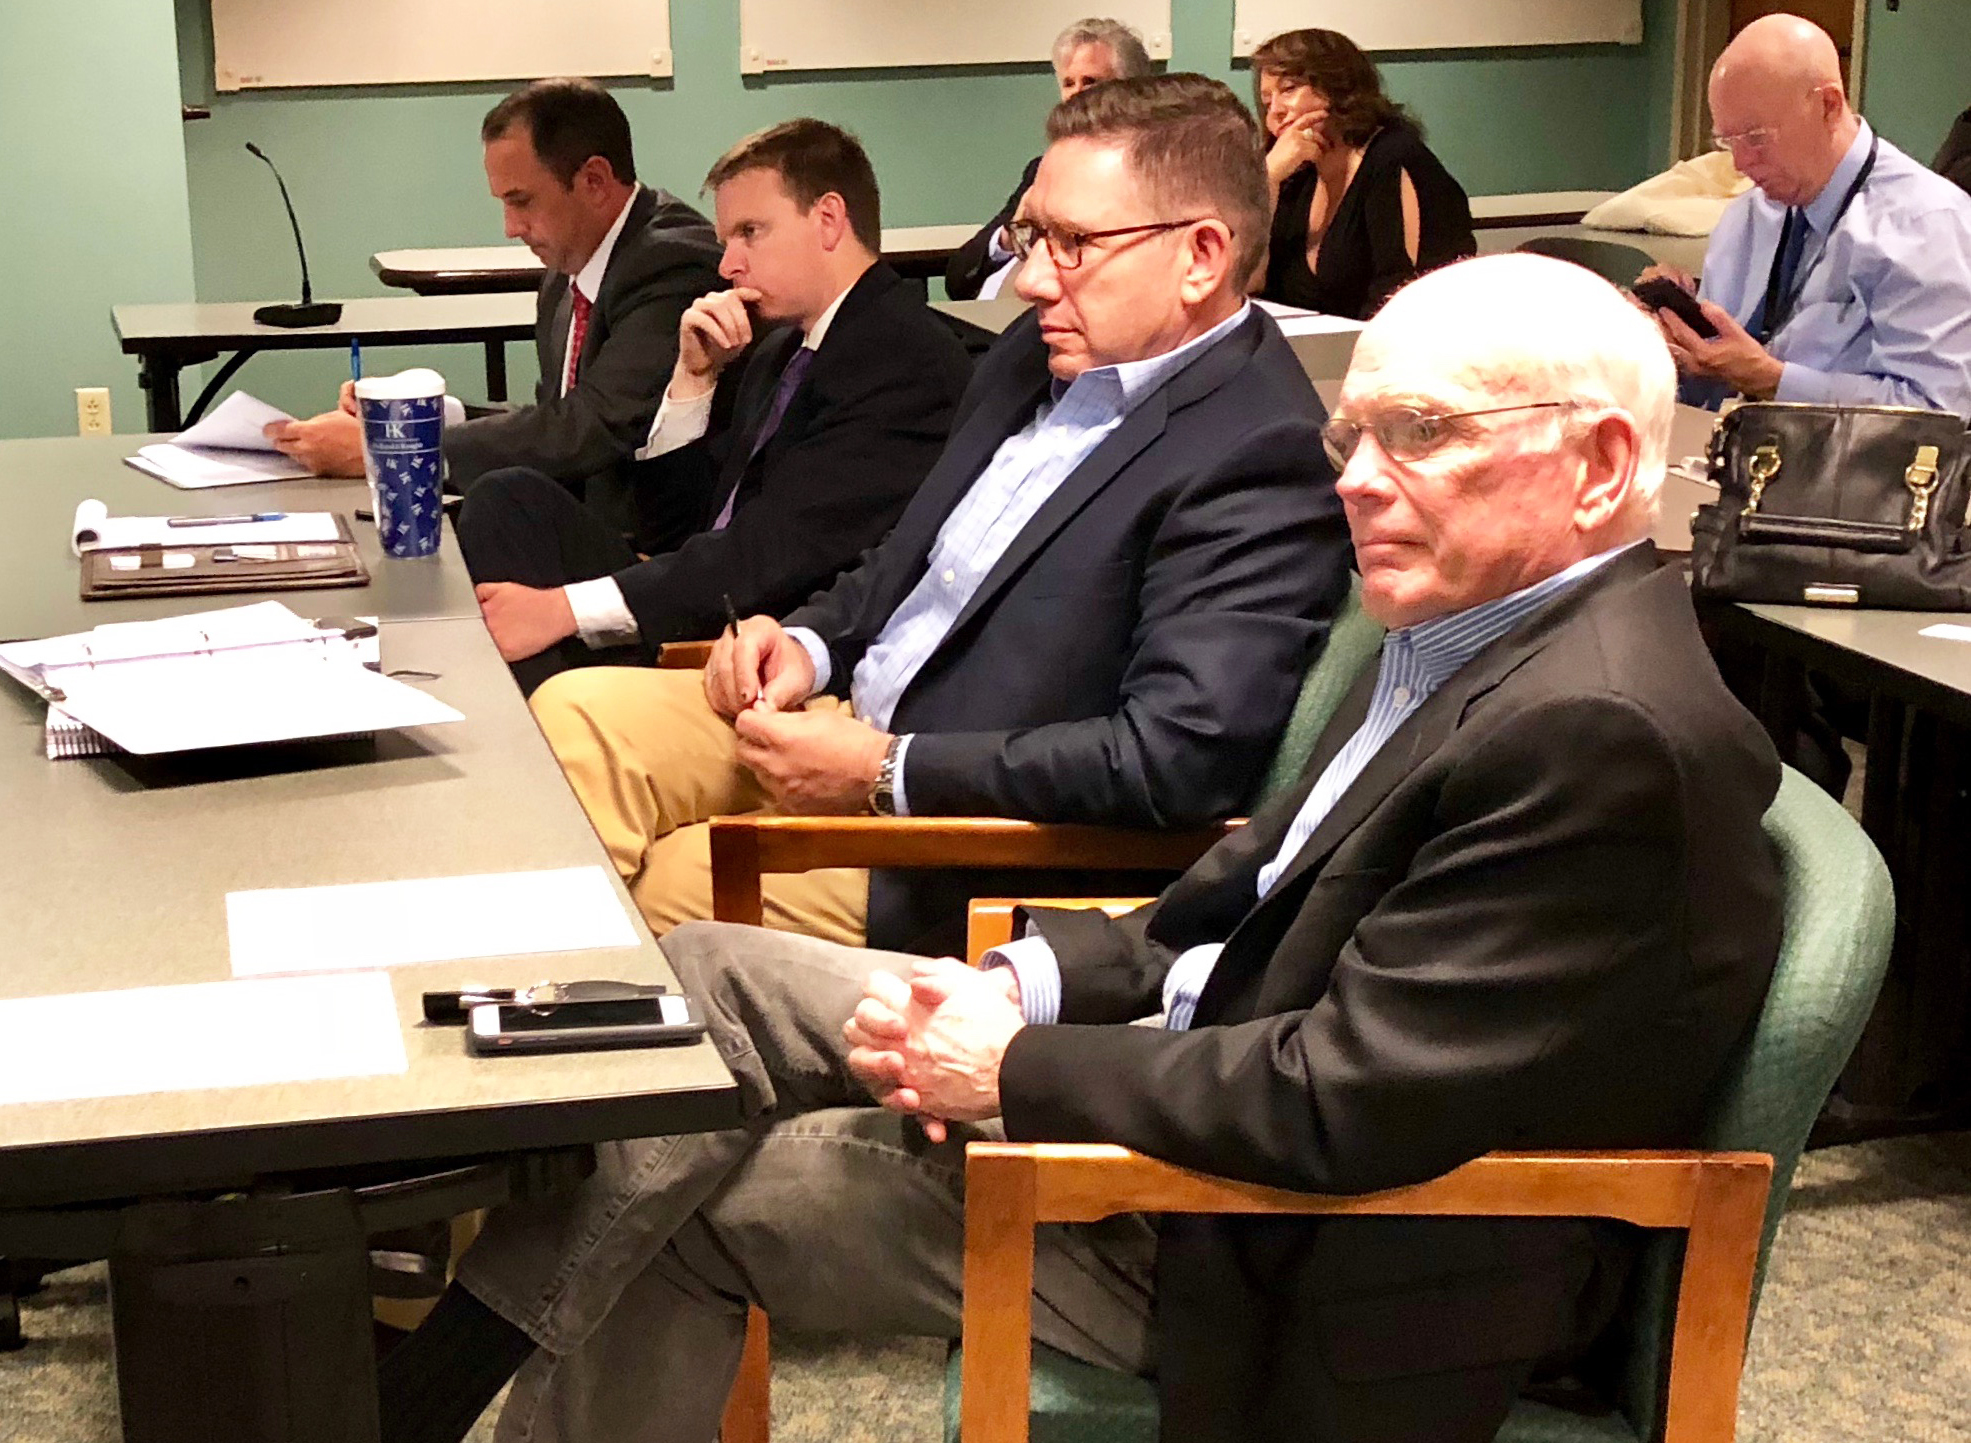 Developers Michael Munz and Peter Rummell watch as the Downtown Investment Authority approves their plans for The District, a Southbank mixed-use project on April 11.